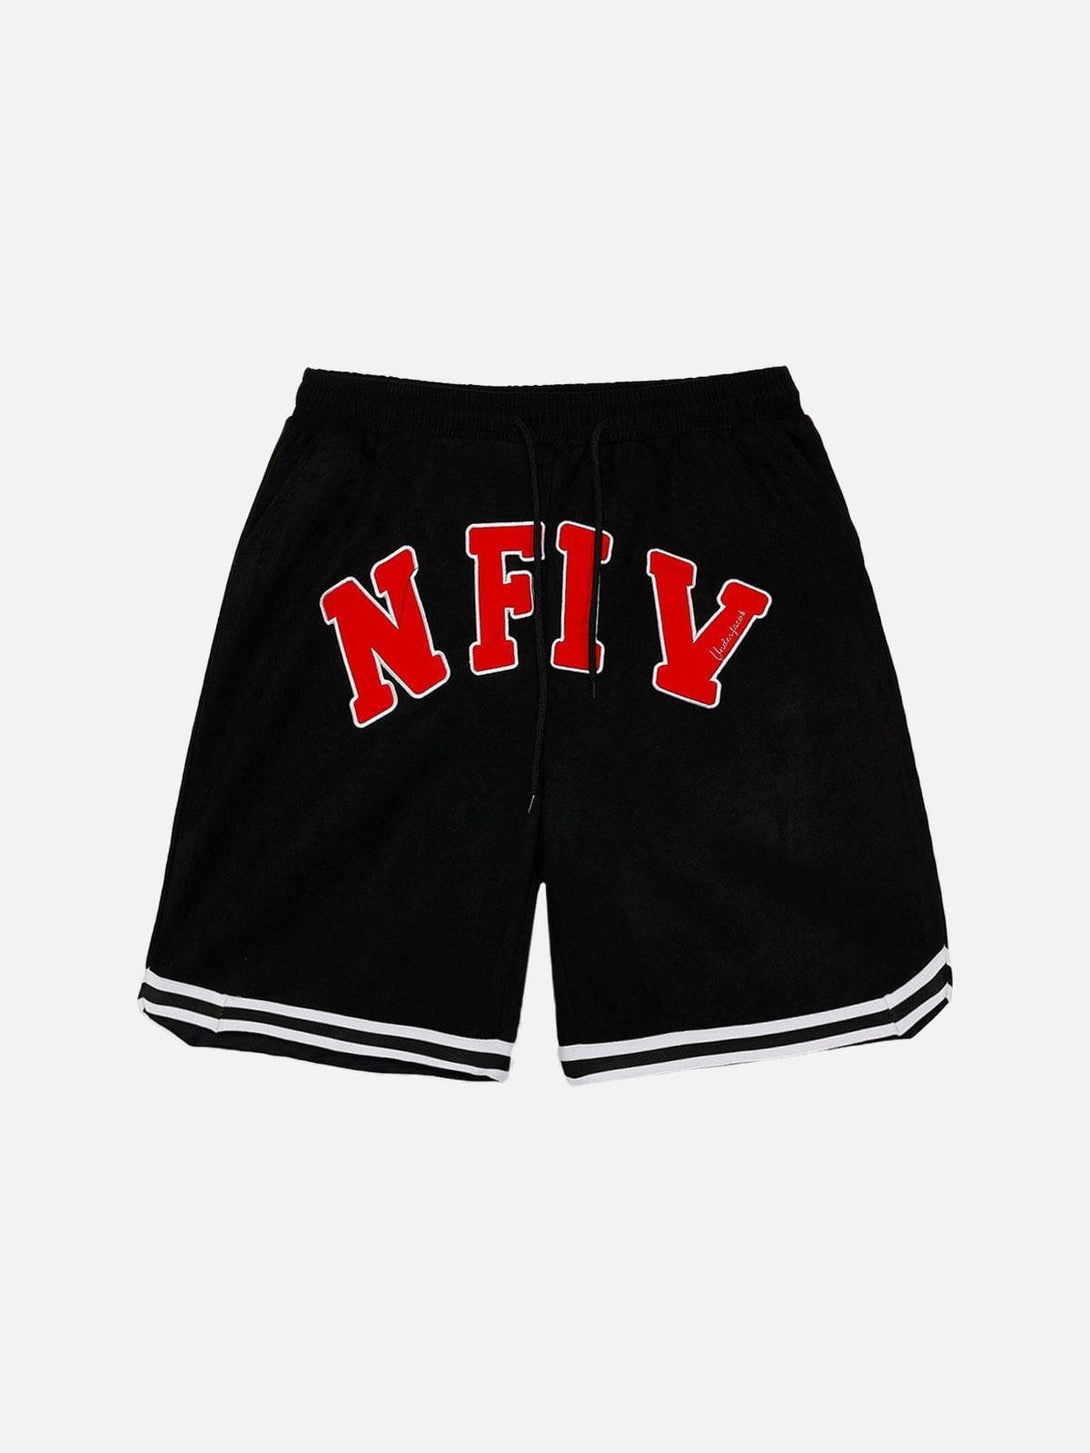 Majesda® - Suede "NFIV" Letters Print Shorts outfit ideas streetwear fashion